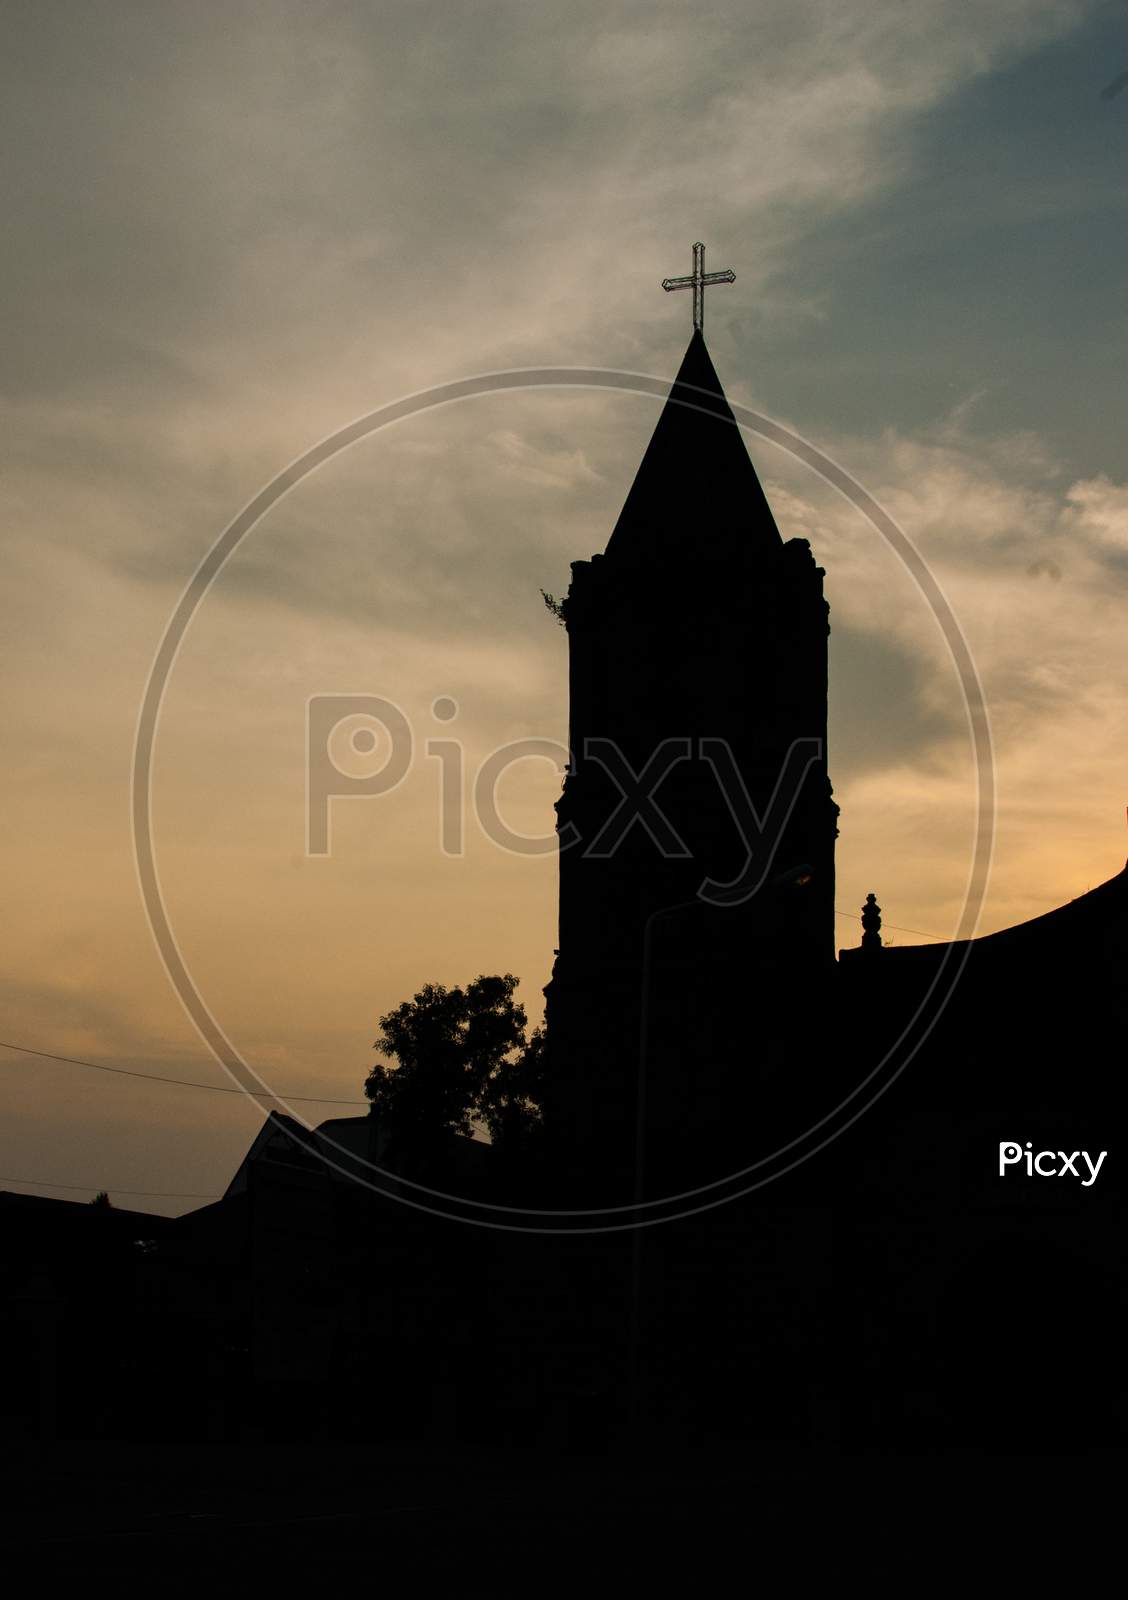 Silhouette of an old stone church